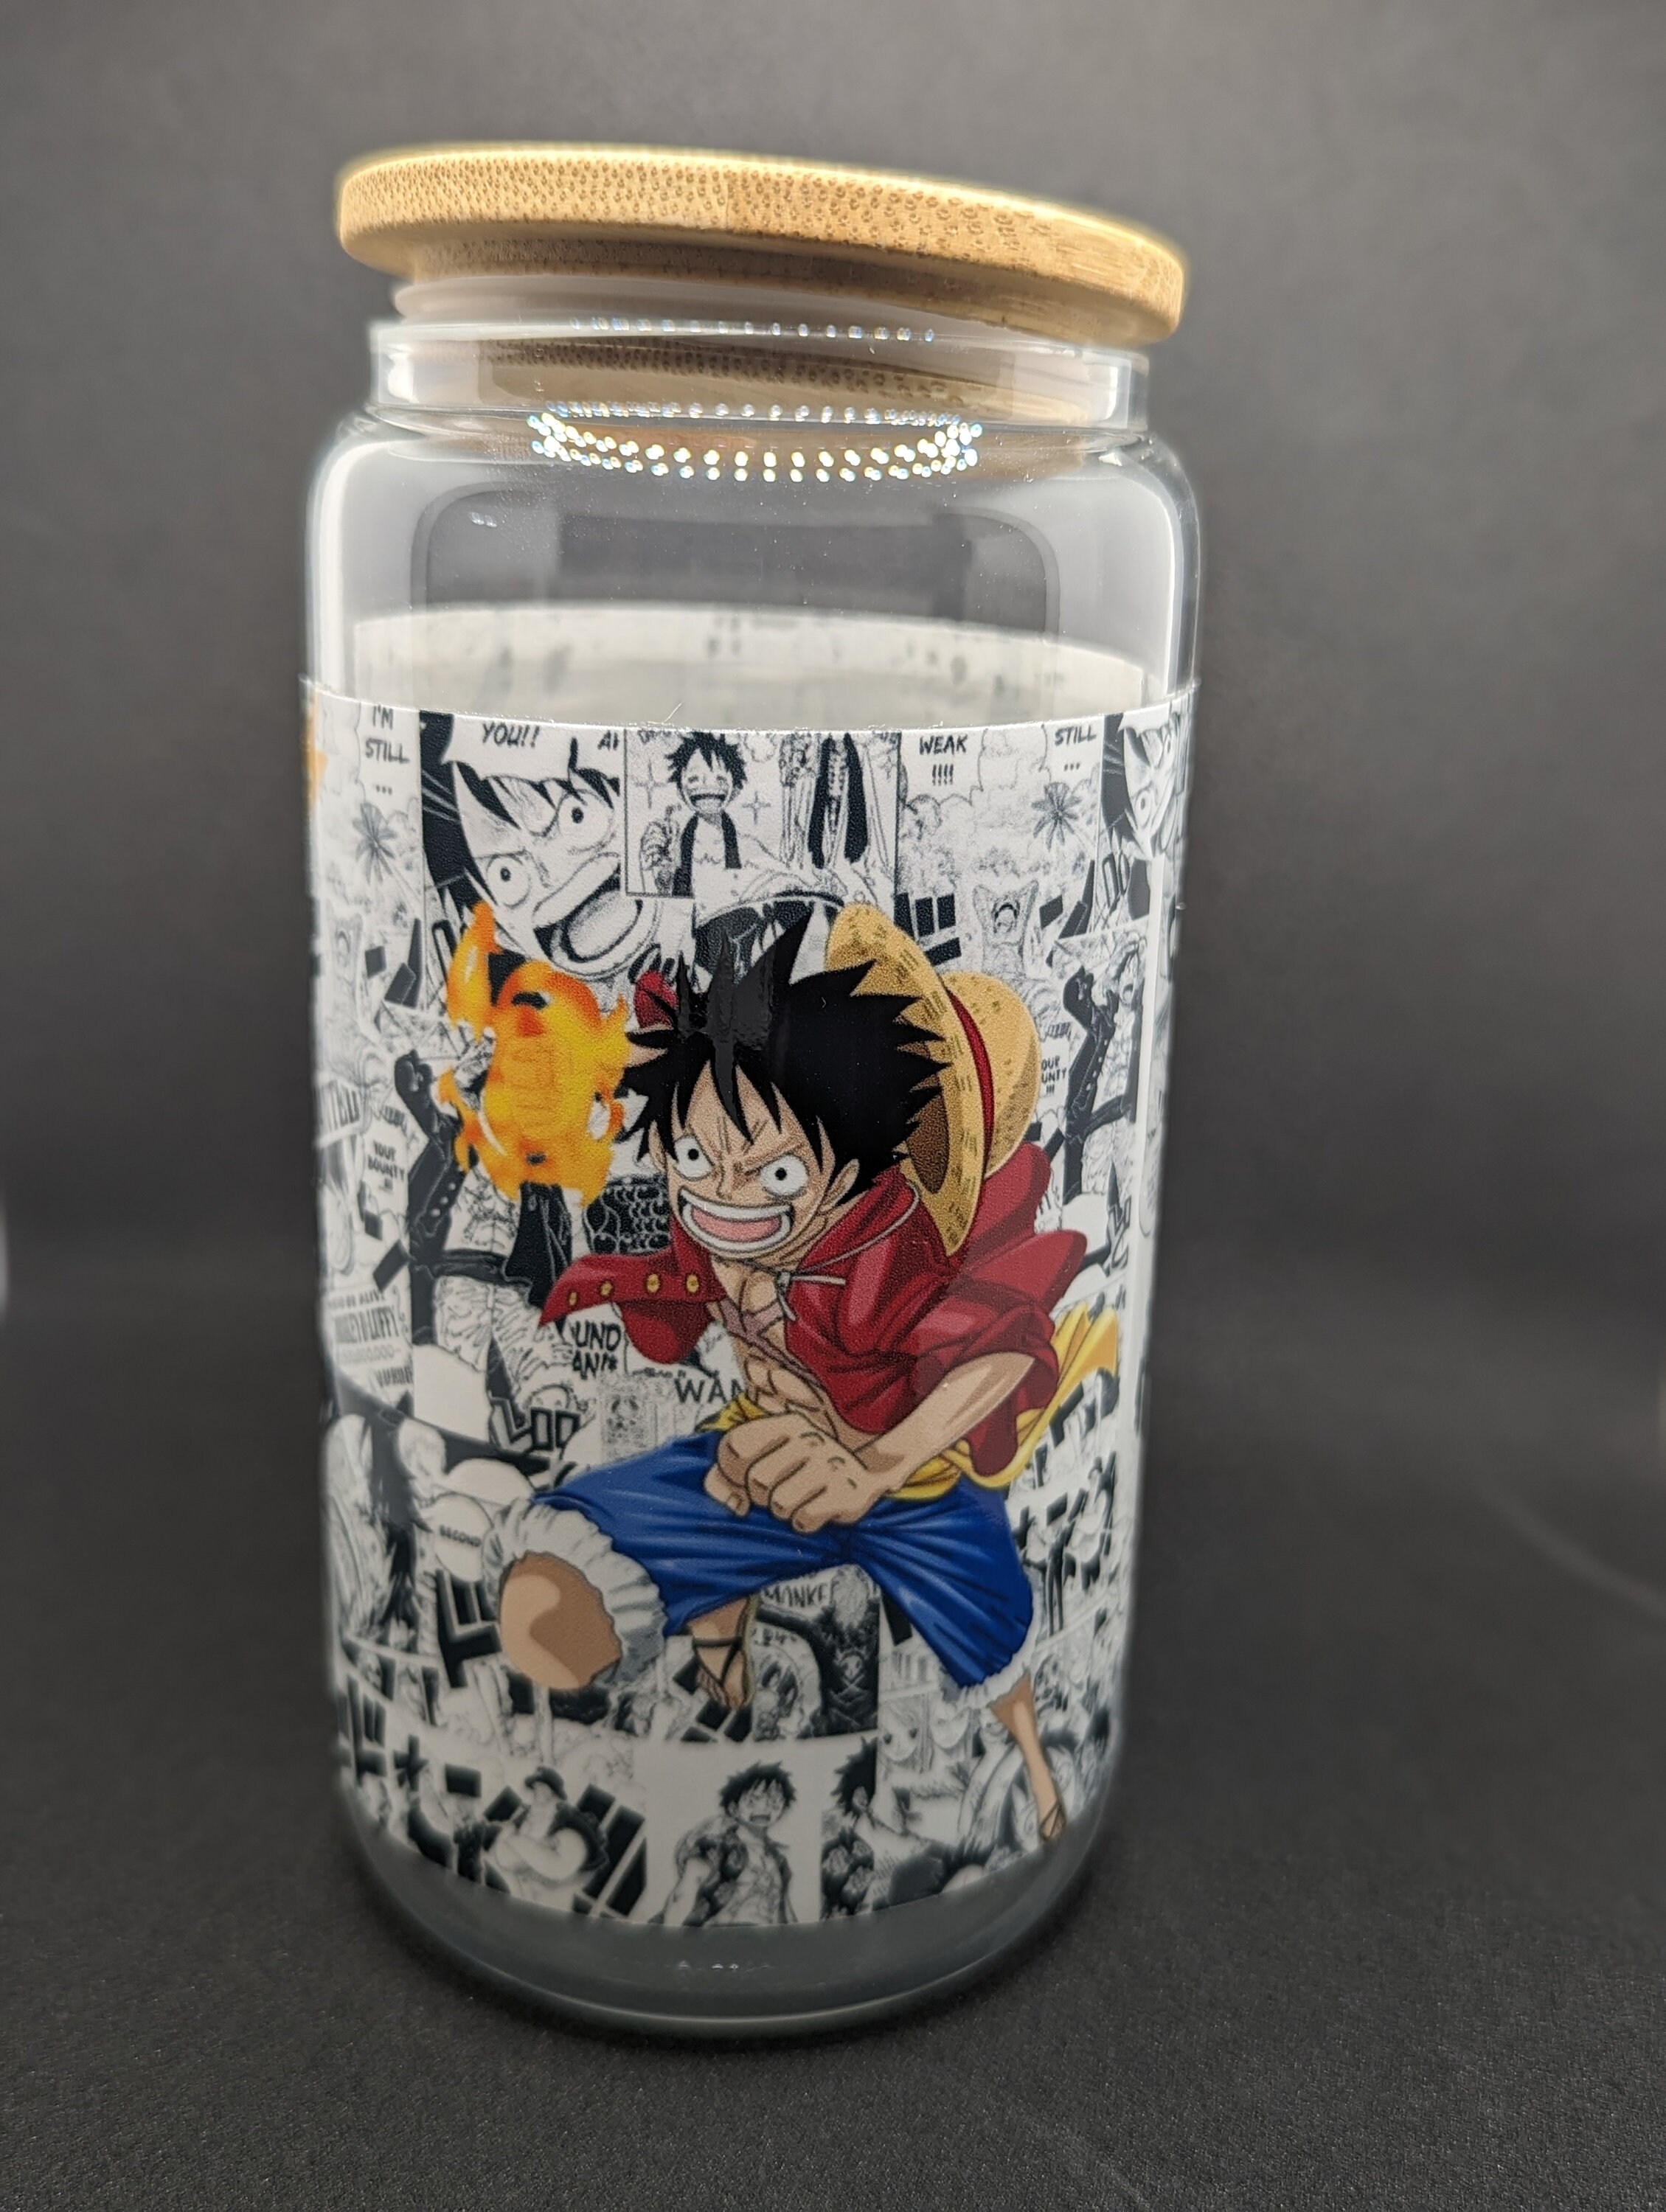 New Anime Periphery One Piece Luffy Cask Cup Glass Cup with Lid